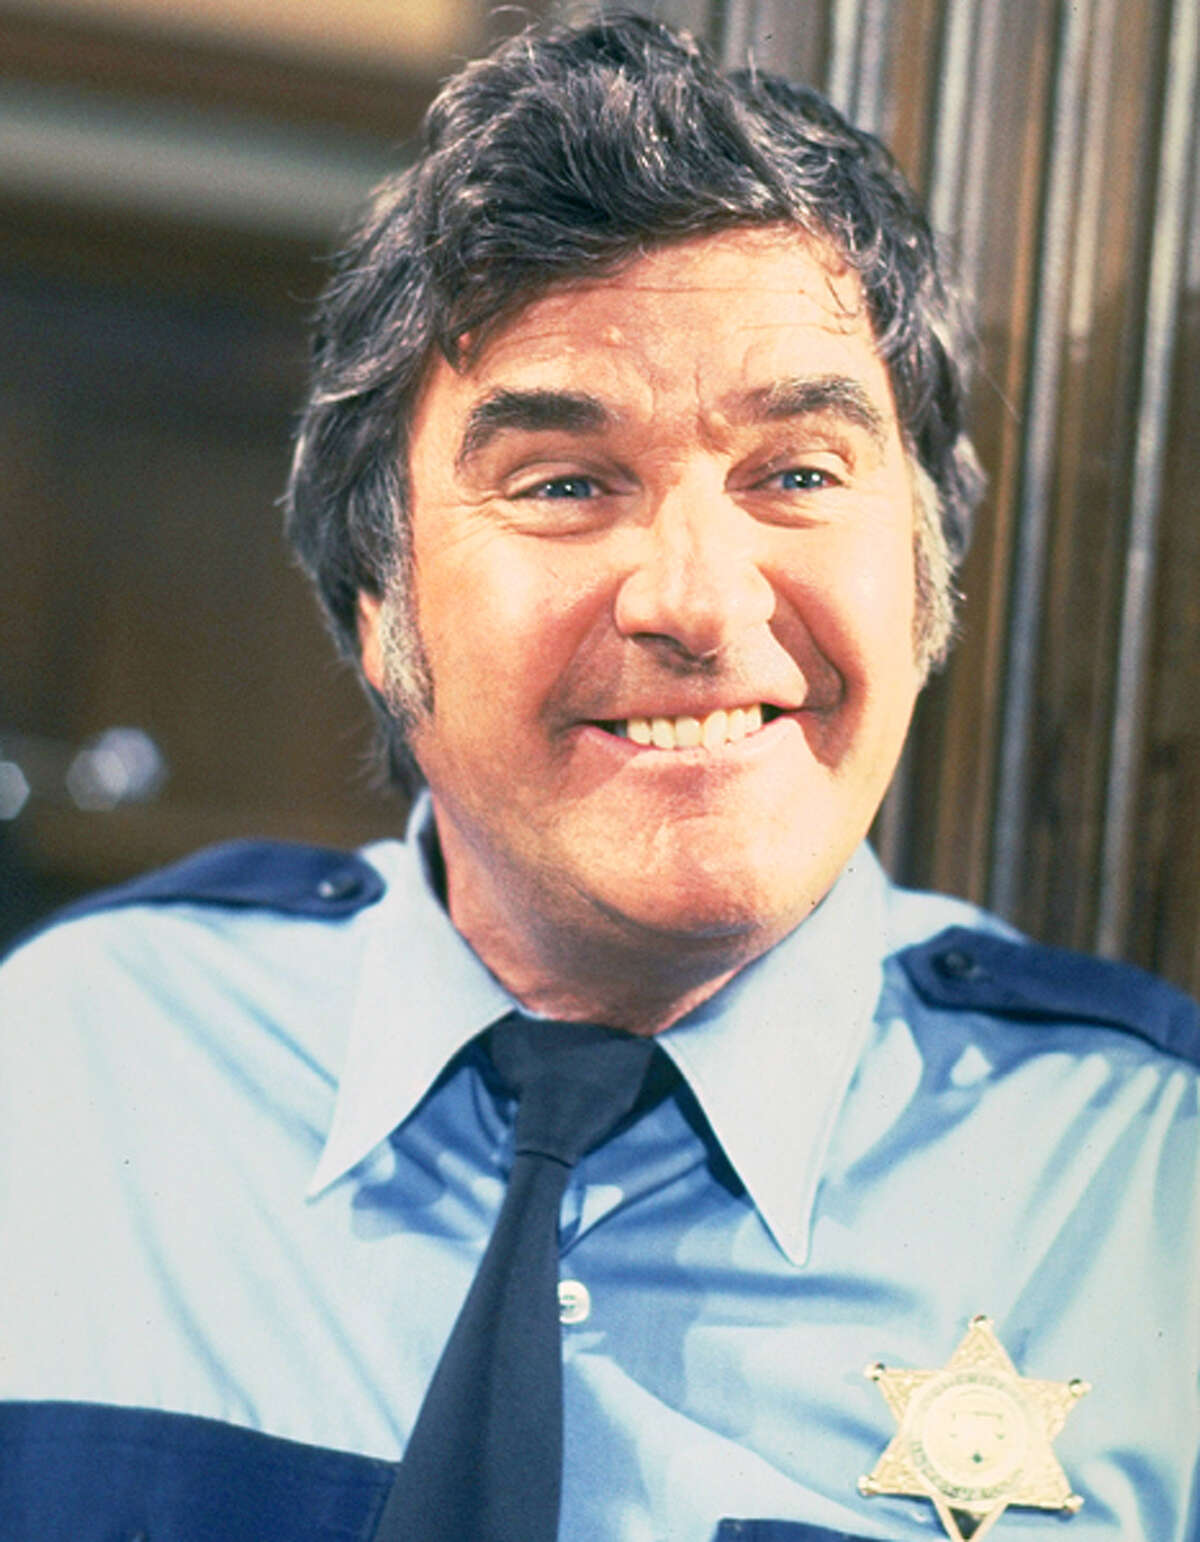 James Best, who played Sheriff Rosco P. Coltrane on the hit TV show “Dukes of Hazzard,” died Monday at 88.See some of Best's photos from behind the scenes at "The Dukes of Hazzard" ...